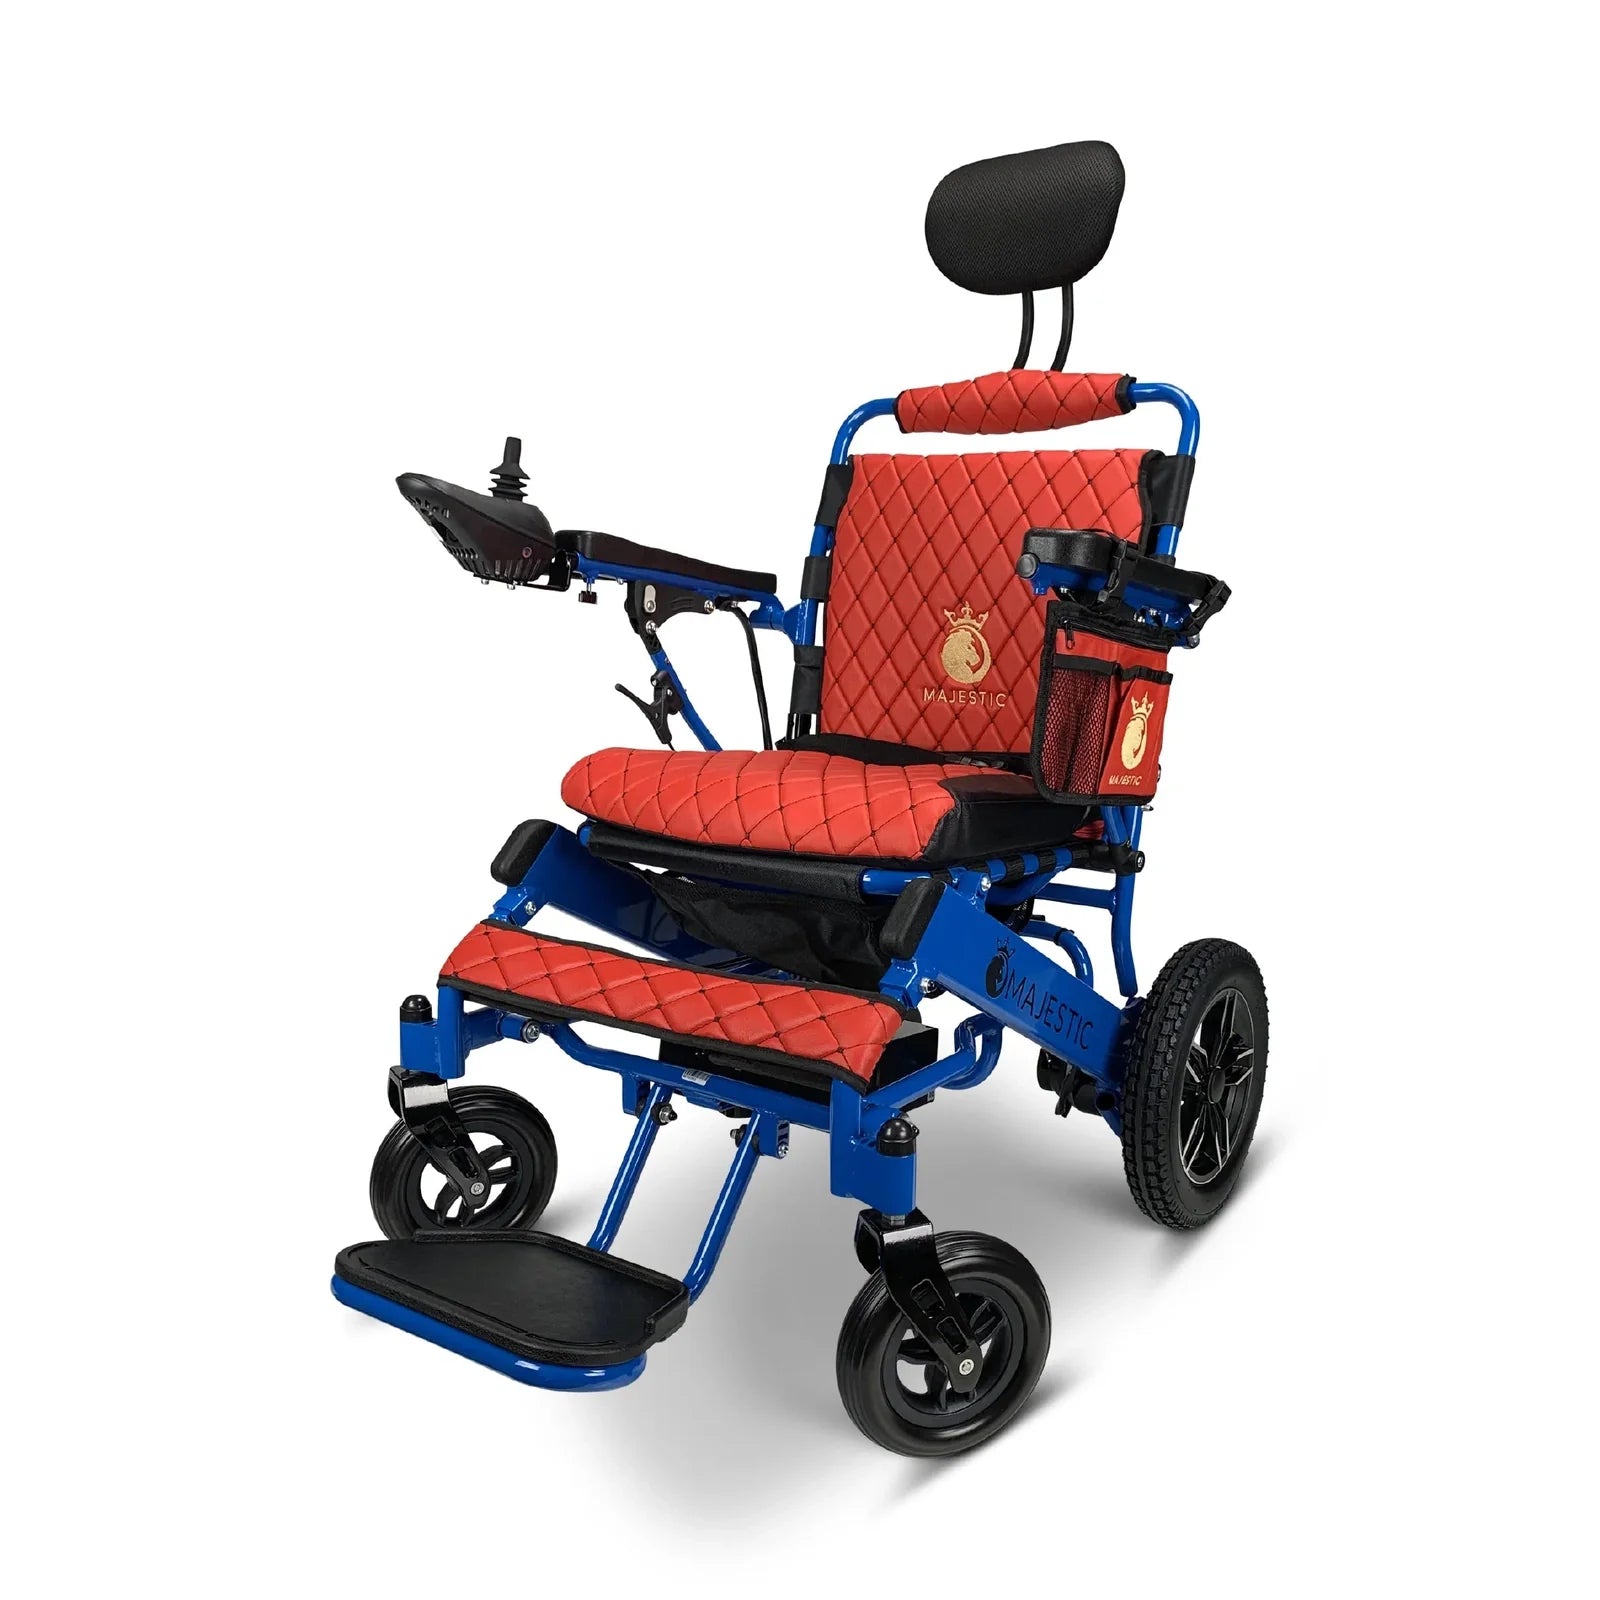 ComfyGO Majestic IQ-8000 Remote Controlled Lightweight Folding Electric Wheelchair Power Wheelchairs ComfyGO Blue Red 10 Miles & 17.5" Seat Width